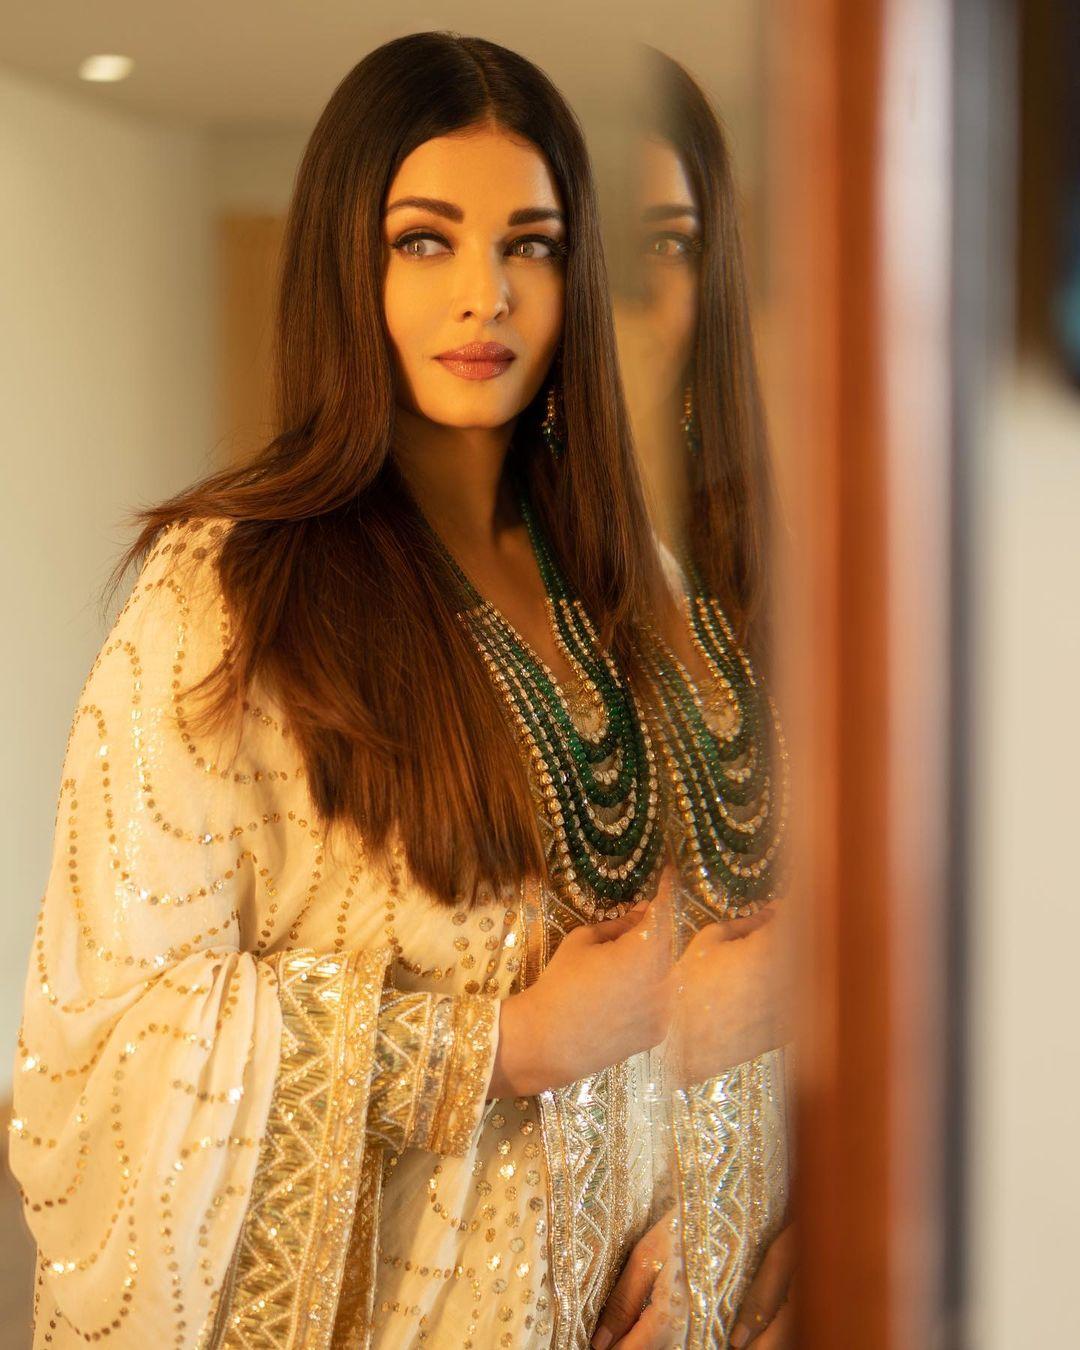 Adorned in a breathtaking white anarkali dress, Aishwarya Rai's appearance transcended the ordinary, exuding an otherworldly charm. 